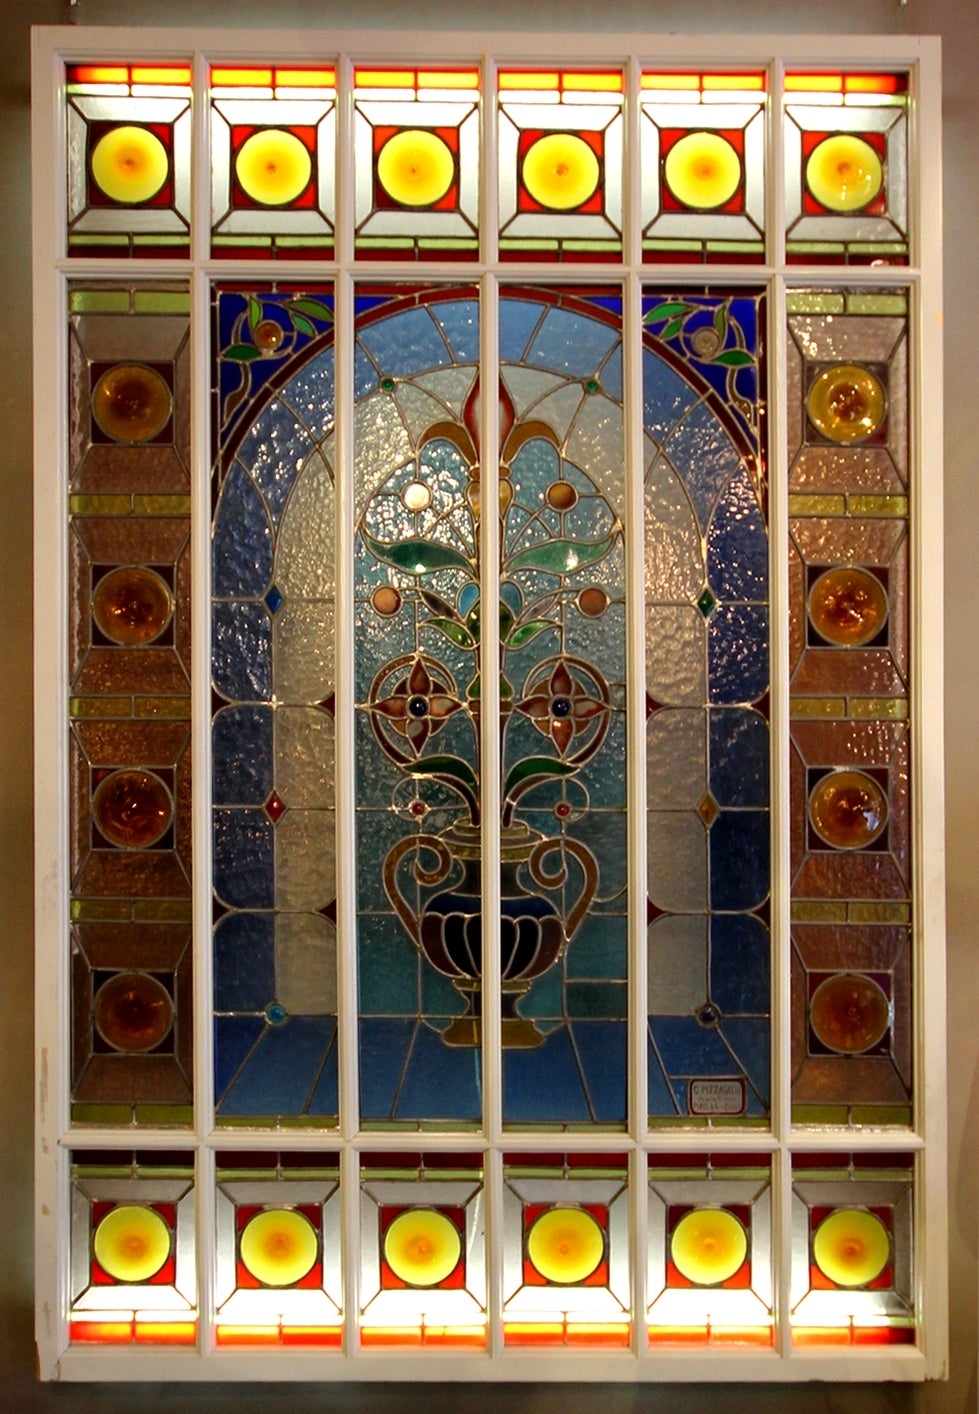 20th Century Stained glass panel by Carlo Pizzagalli, circa 1900